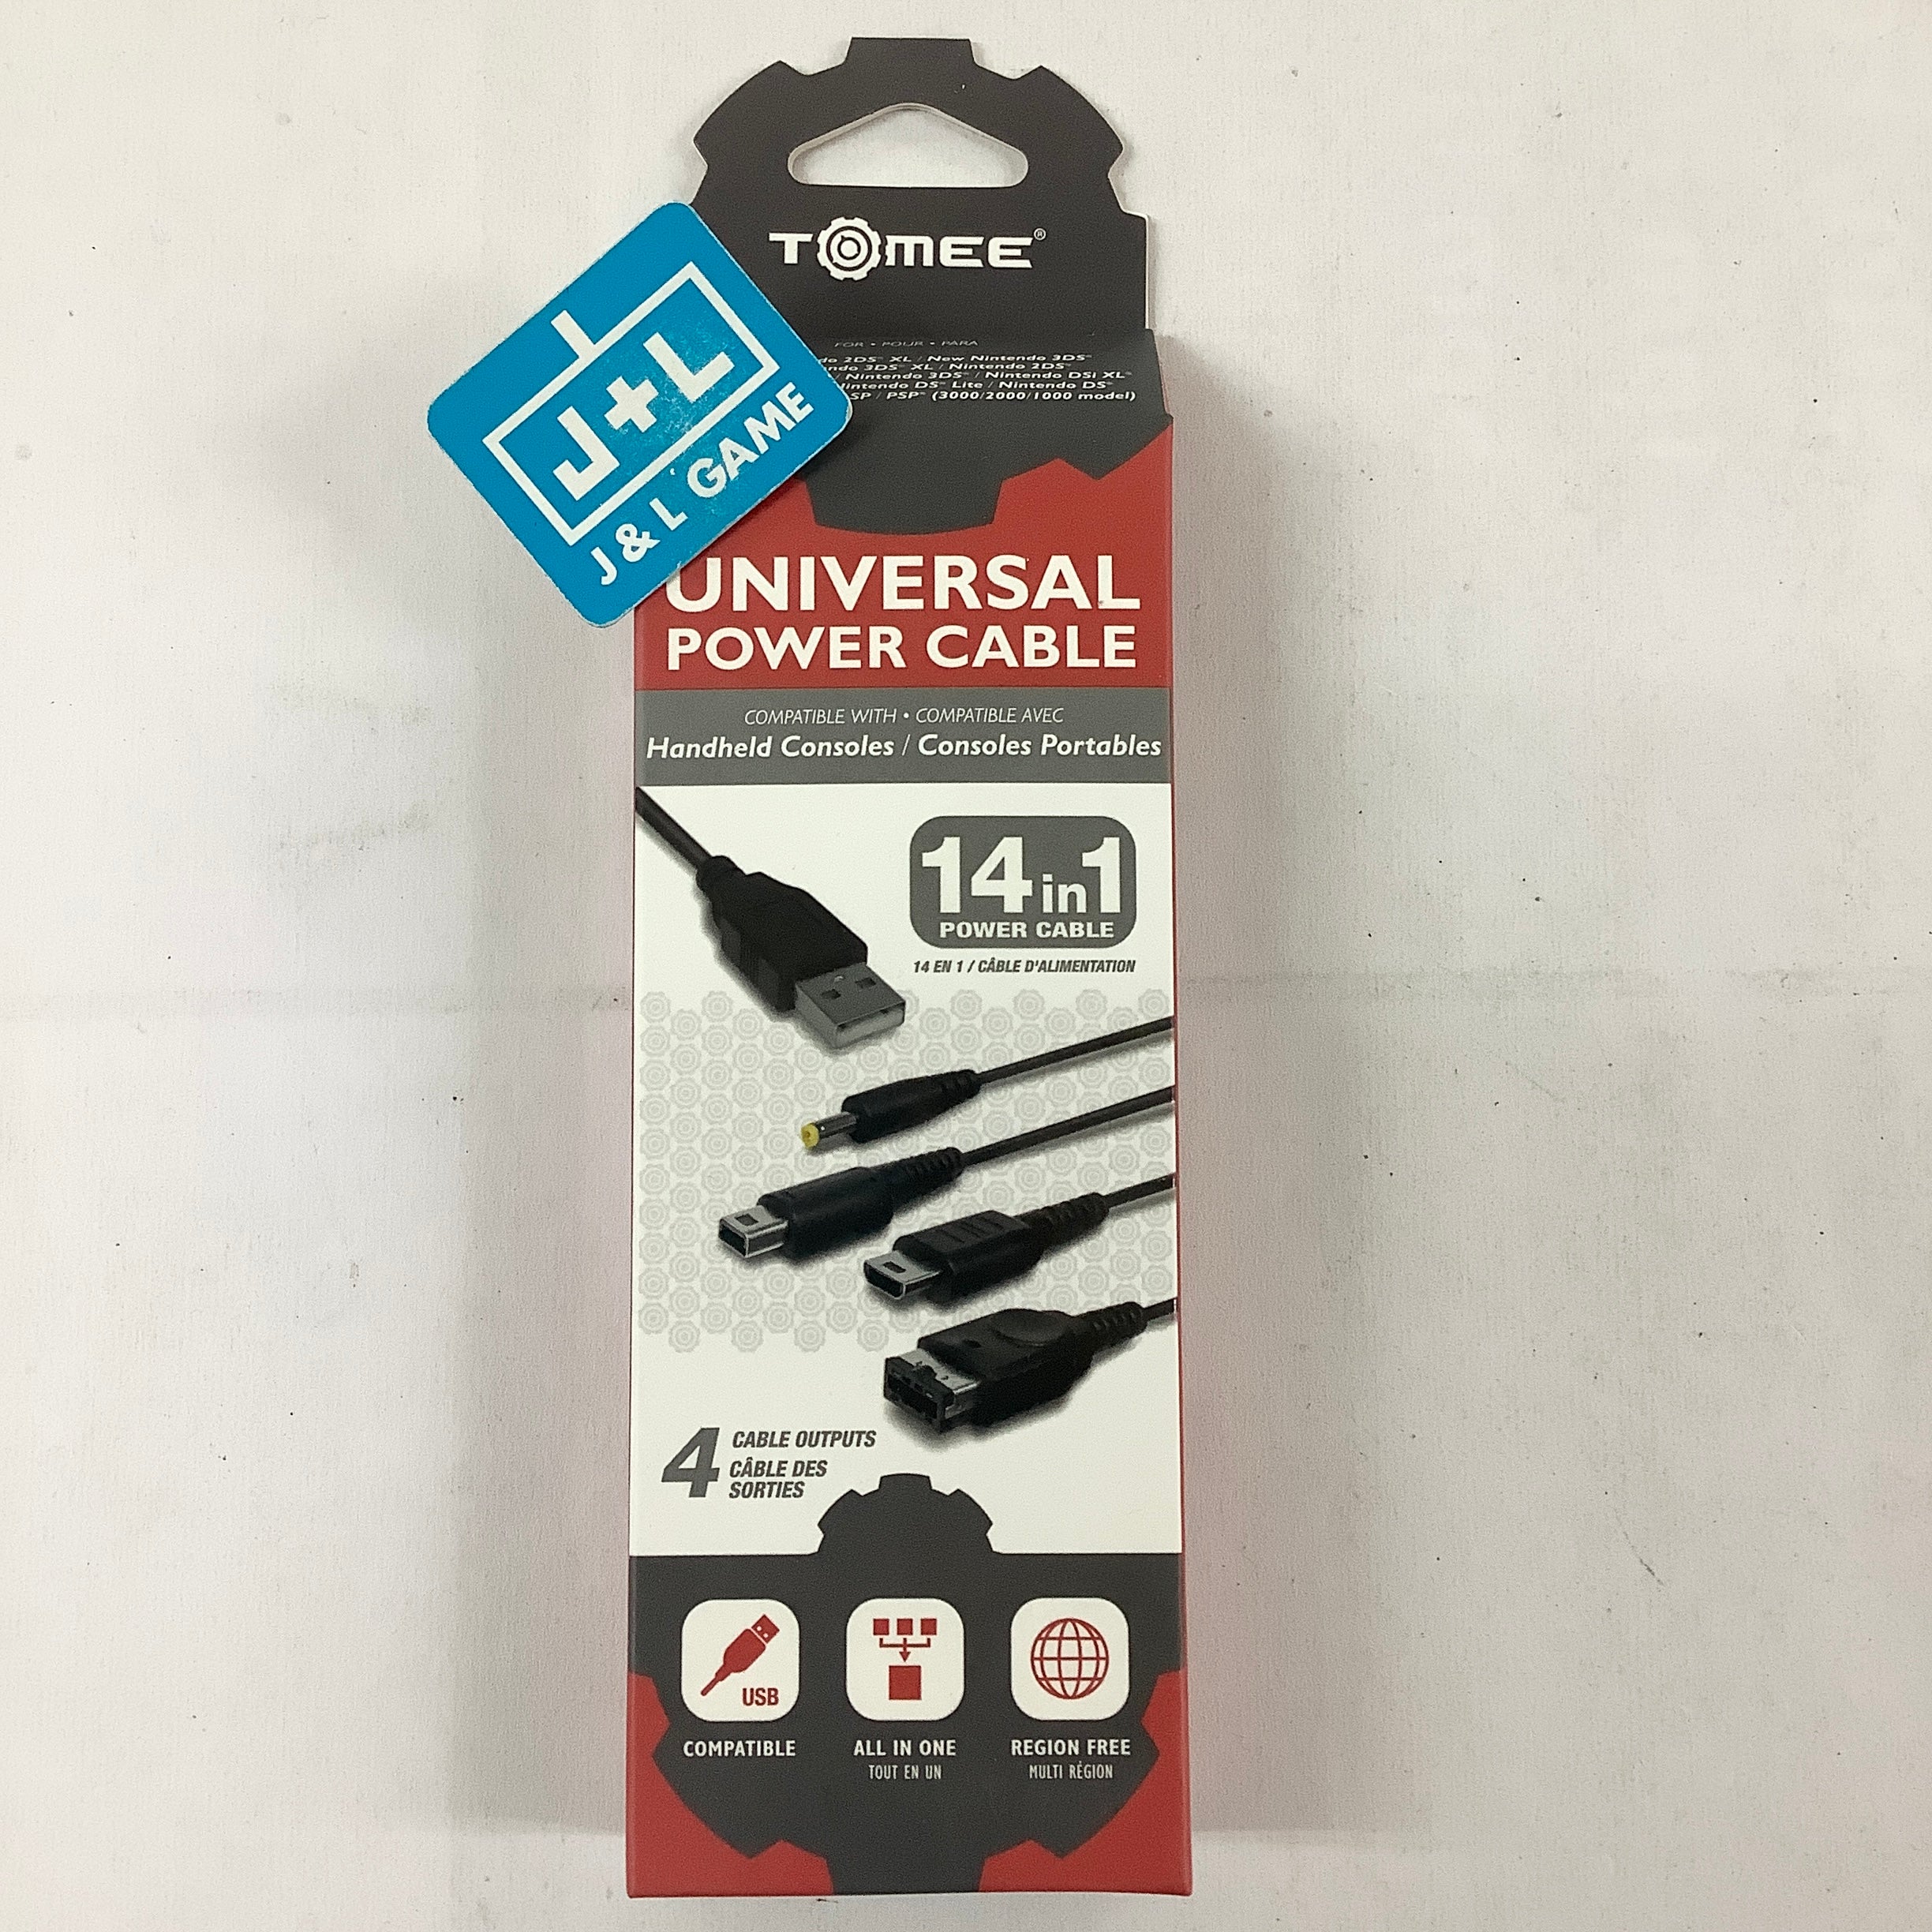 Tomee Universal Power Cable Accessories Tomee   